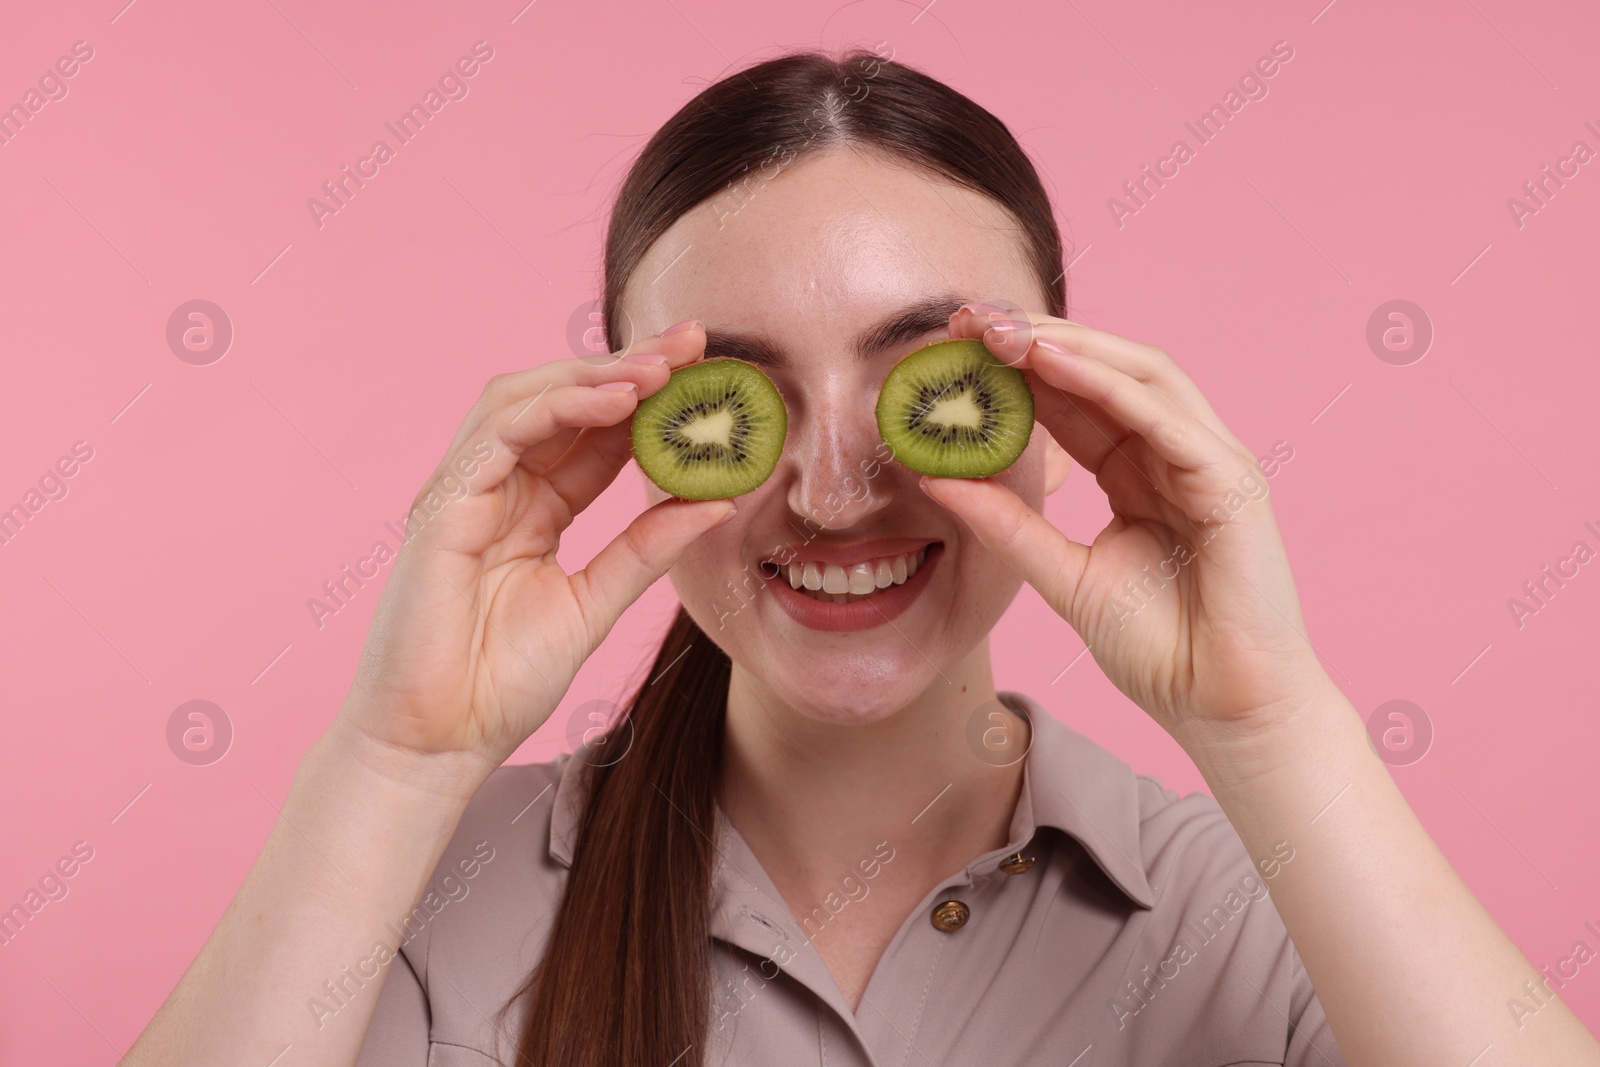 Photo of Smiling woman covering eyes with halves of kiwi on pink background